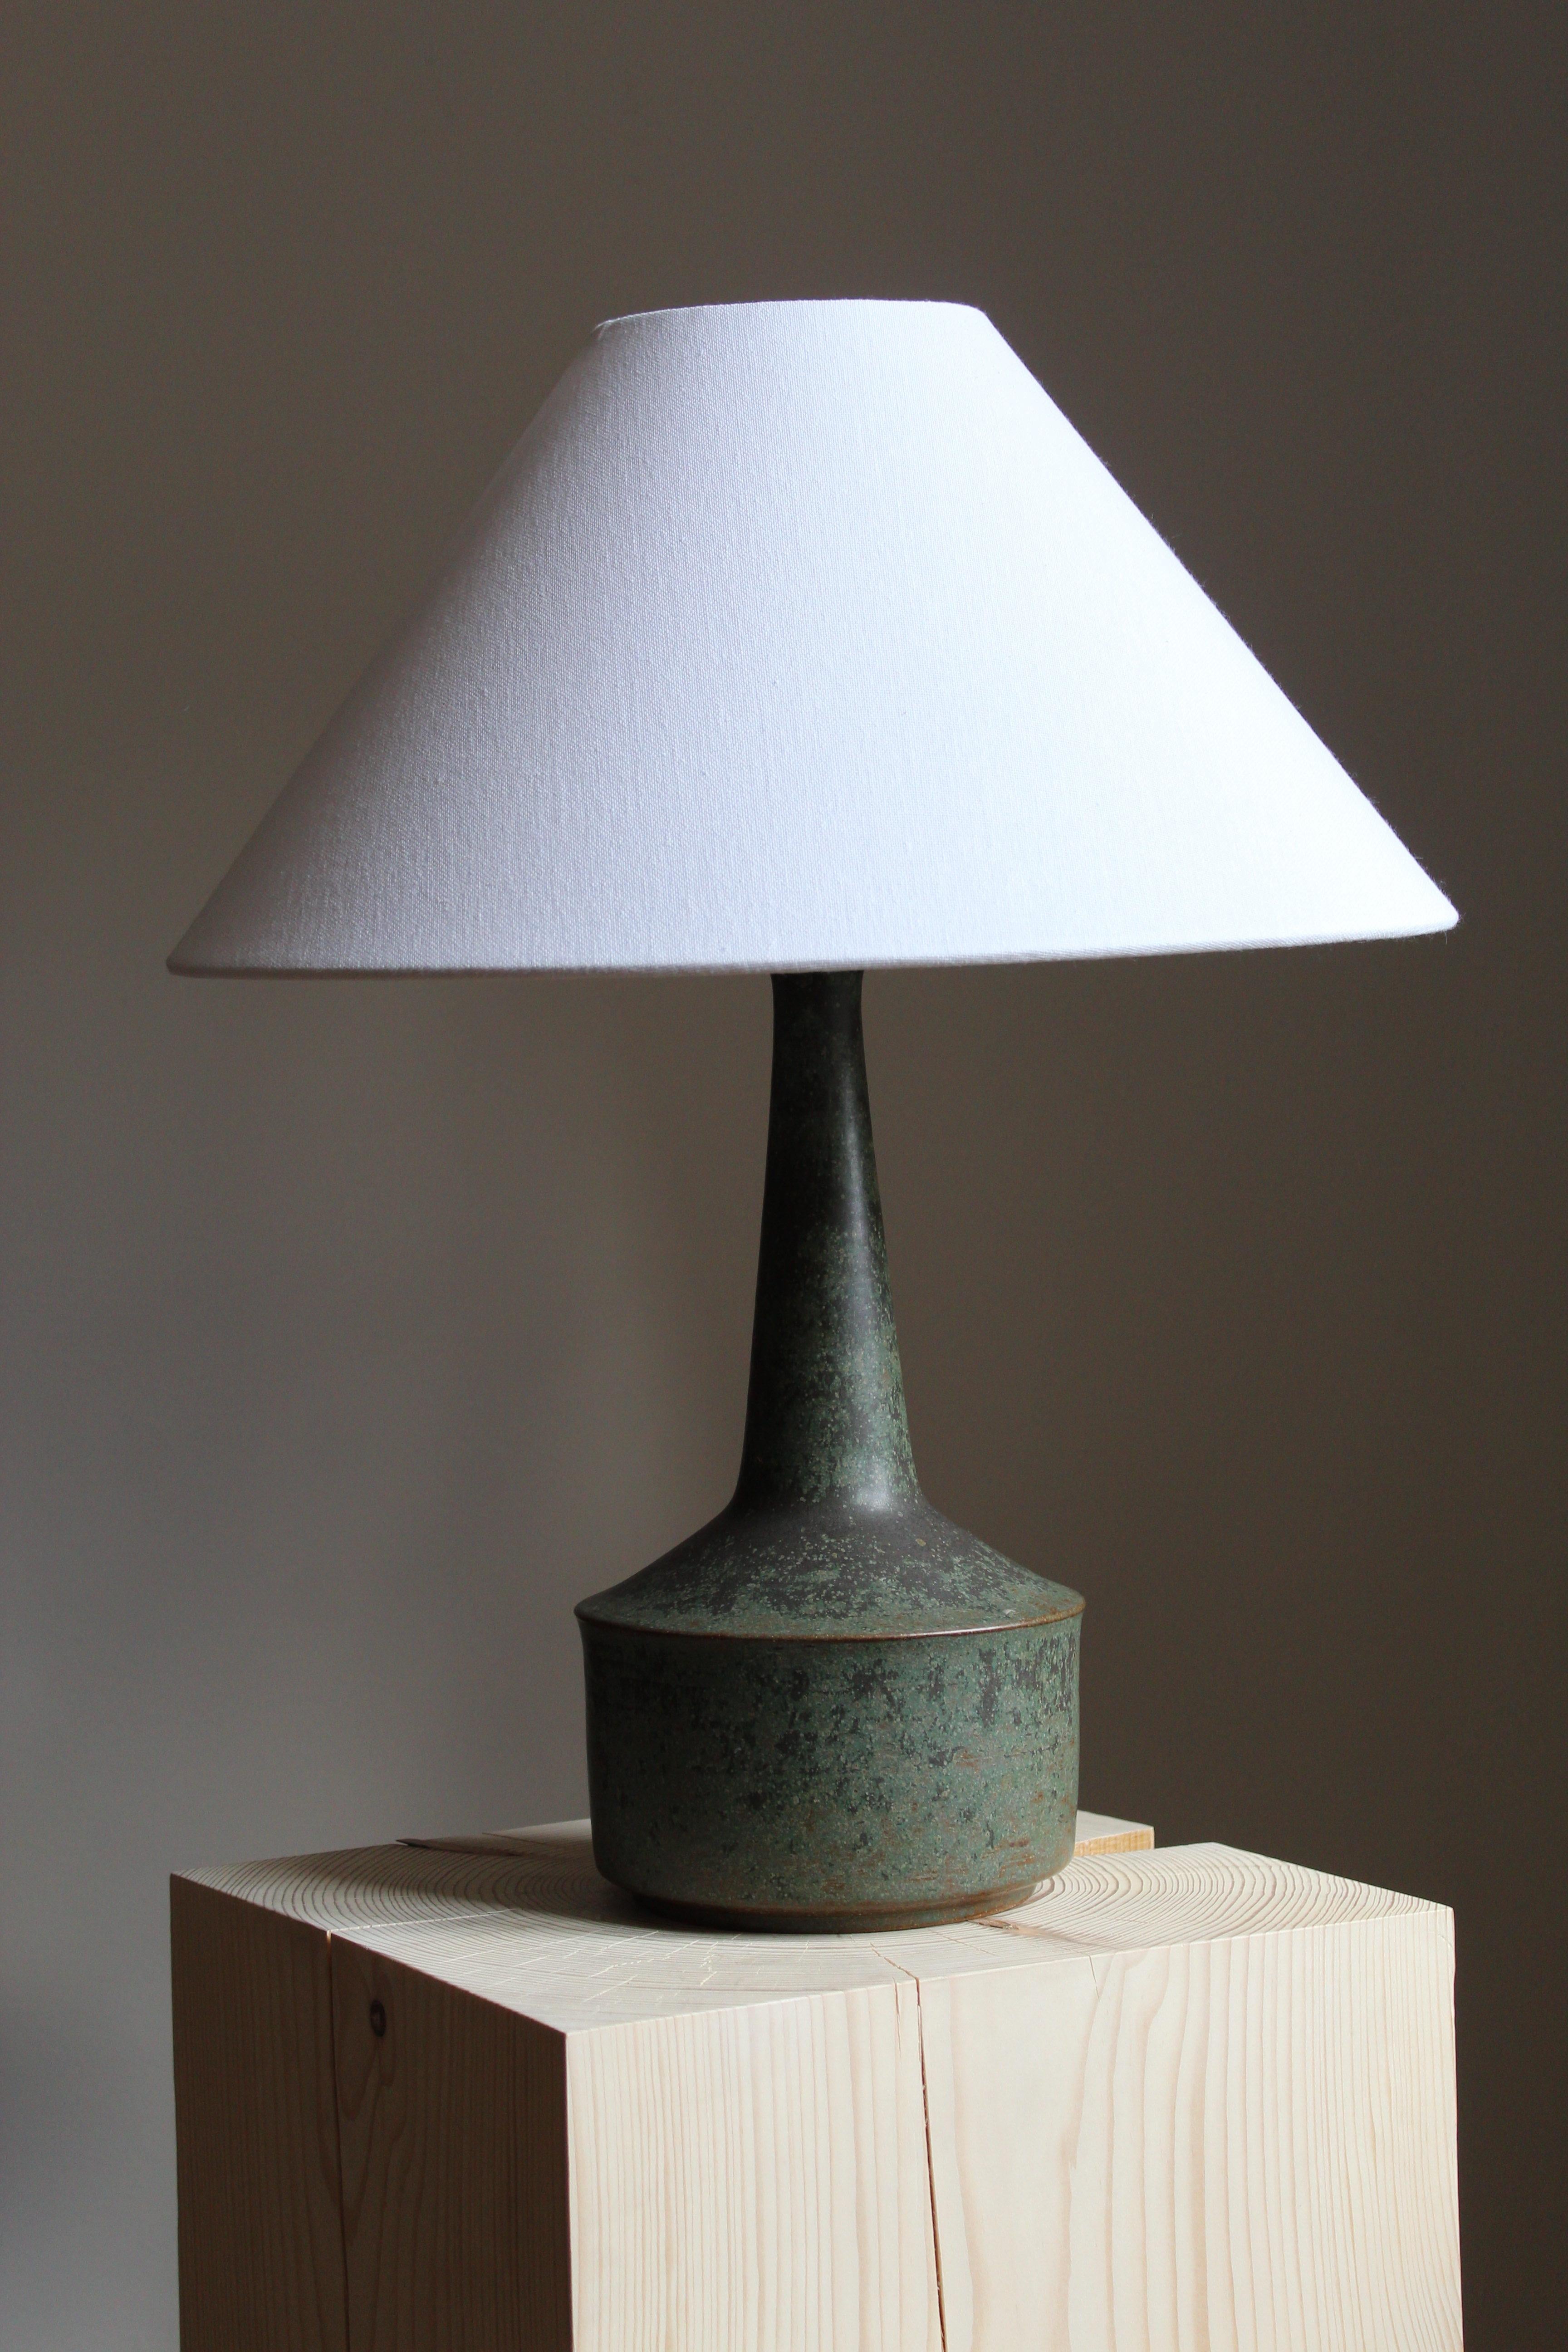 A large table / desk lamp designed by husband and wife Per & Annelise Linneman-Schmidt. Handcast in stoneware. Produced in their own Studio, named Palshus, in Sengeløse, Denmark. Signed.

Sold without lampshade. Stated dimensions exclude